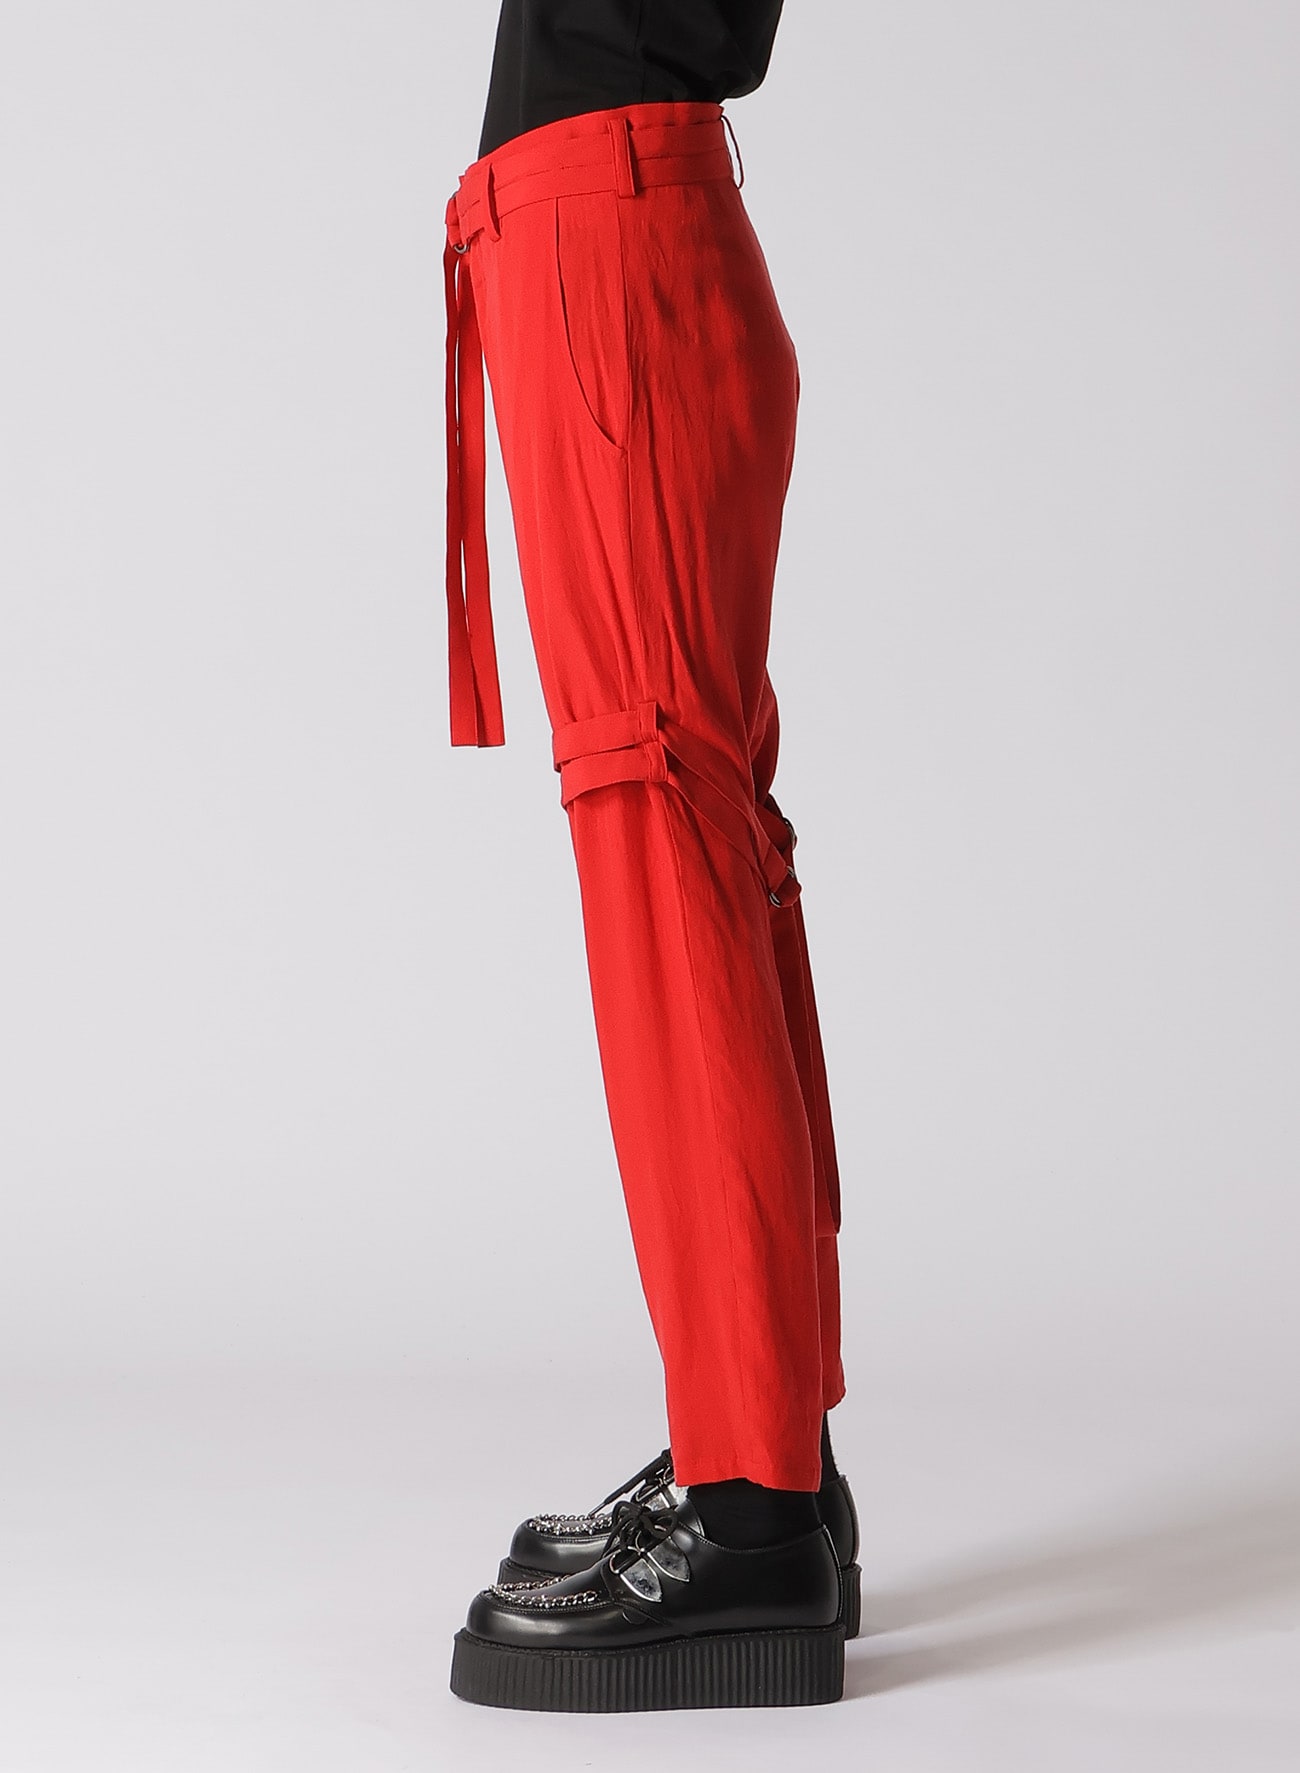 SOFT BROAD COTTON HANGING STRAP PANTS(S Red): LIMI feu｜THE SHOP 